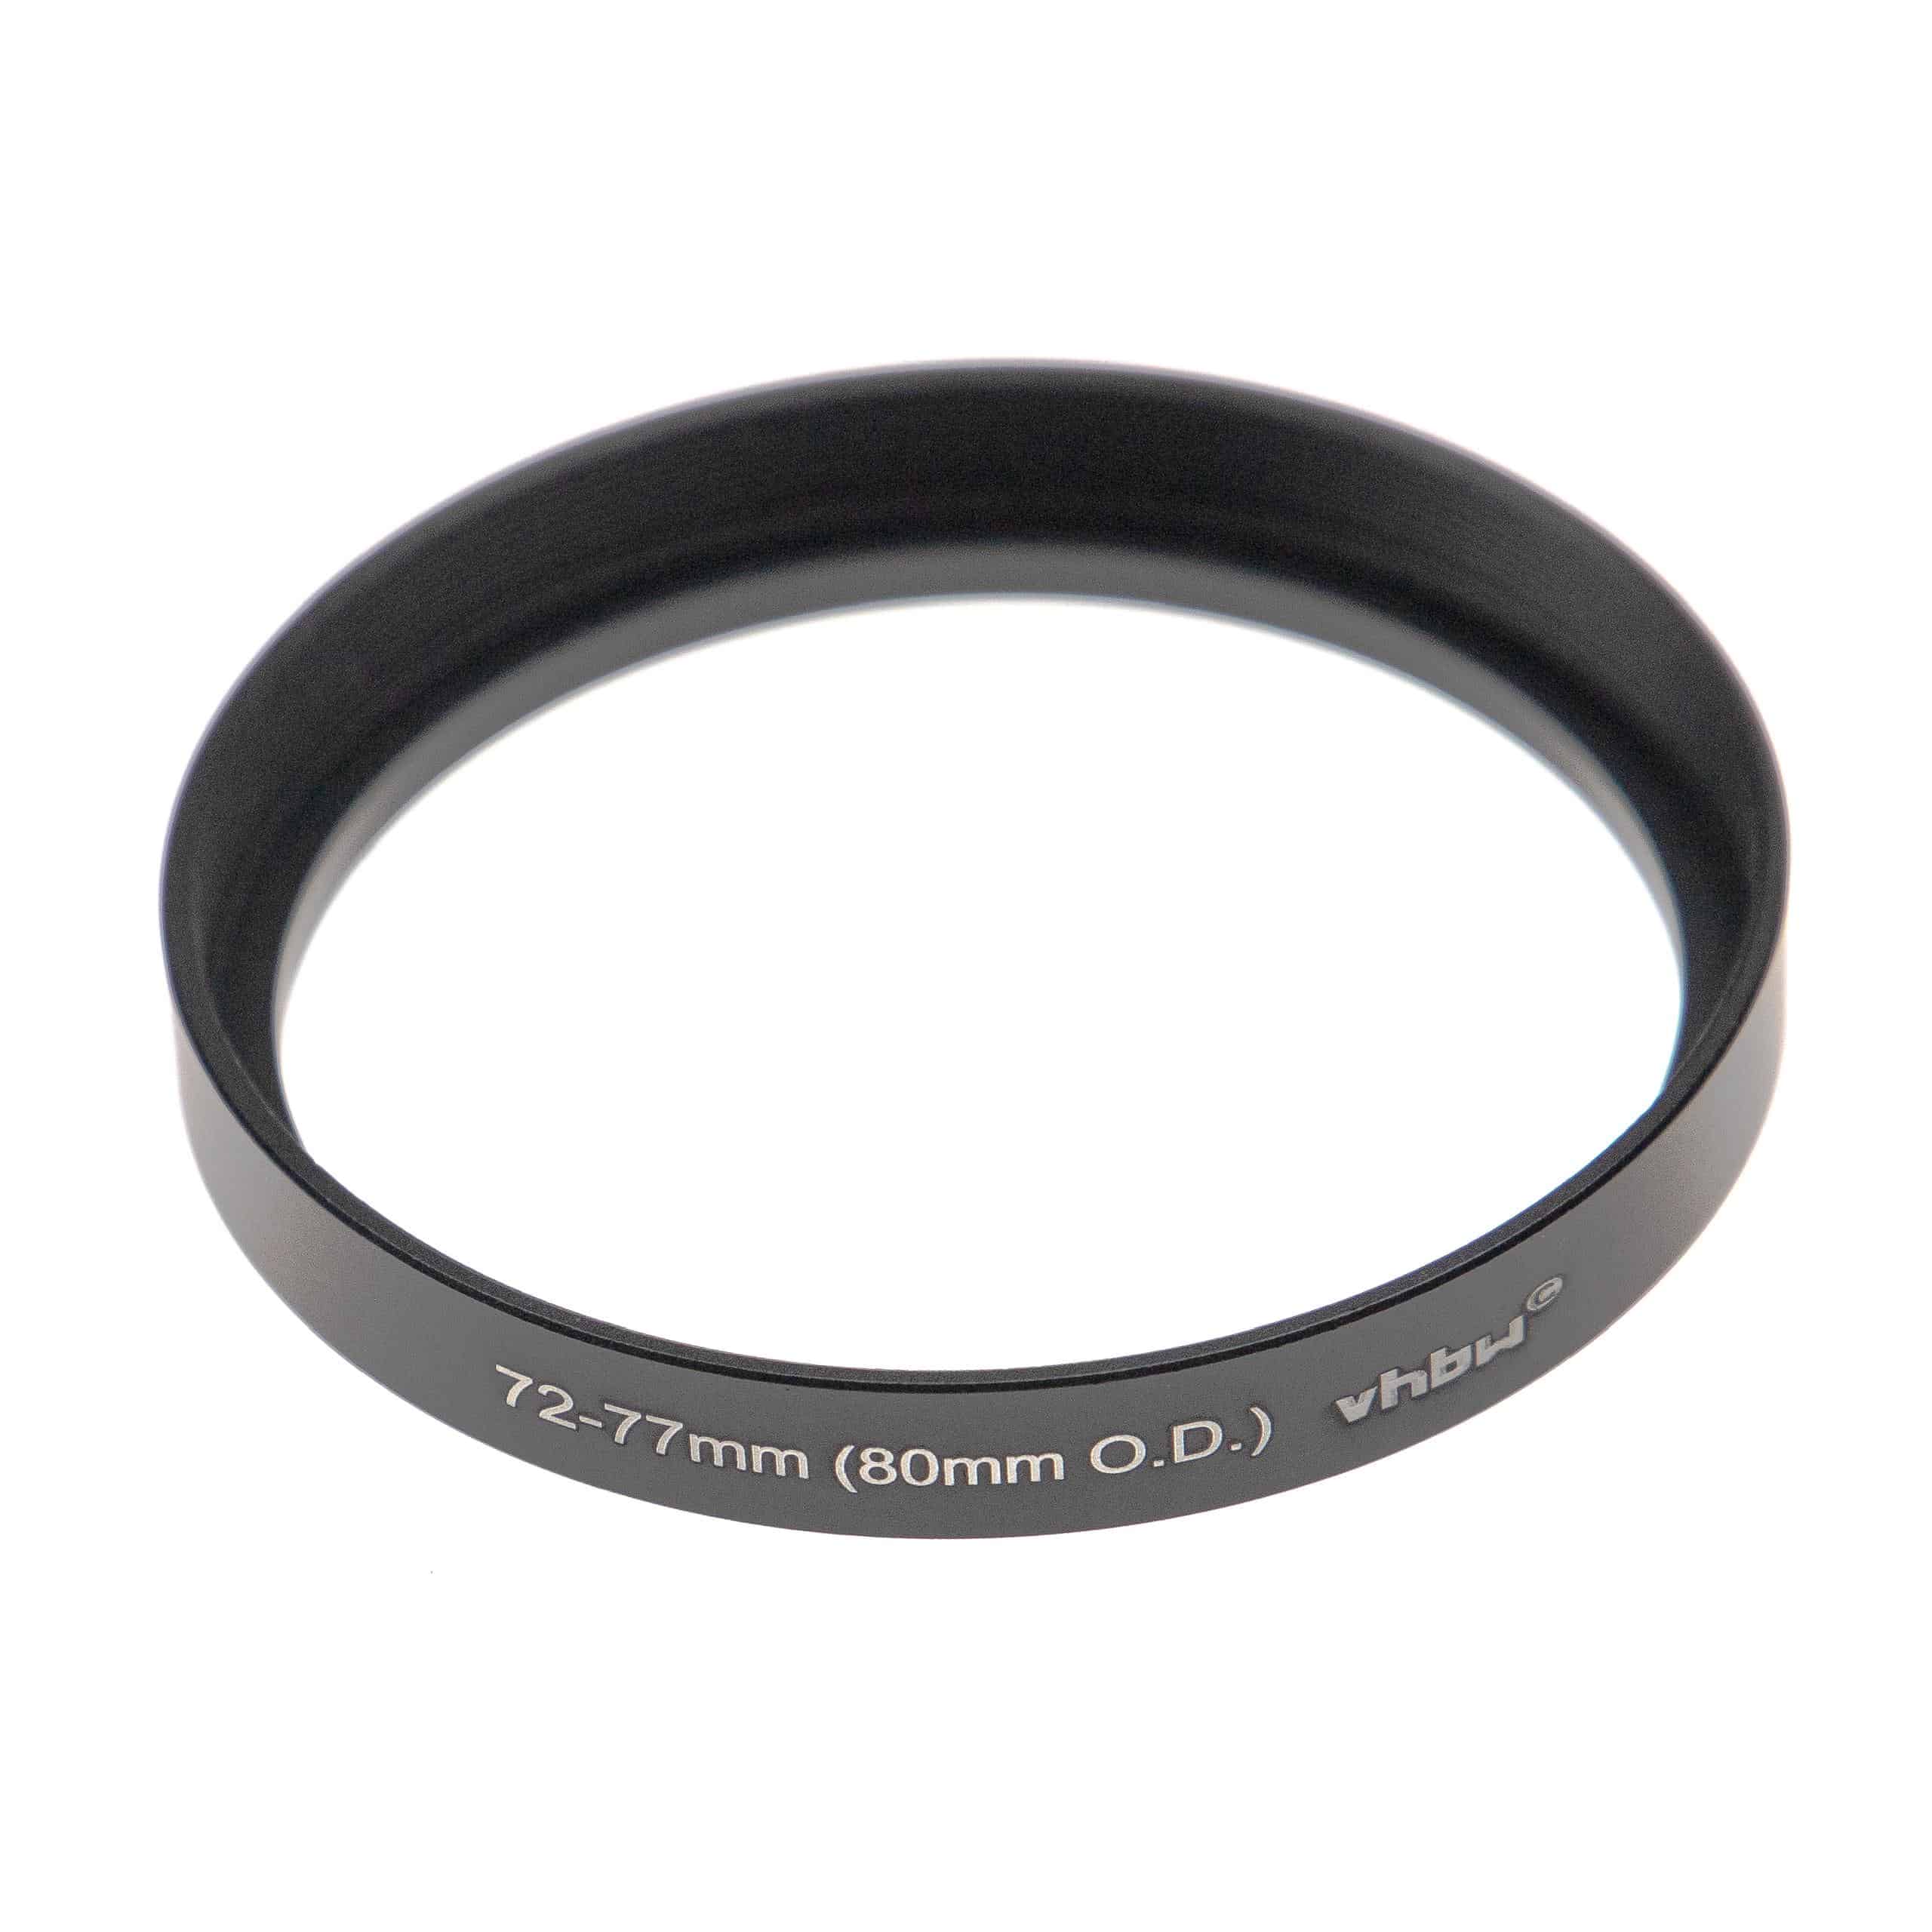 Step-Up Ring Adapter of 72 mm to 77 mm for matte box 80 mm O.D. - Filter Adapter